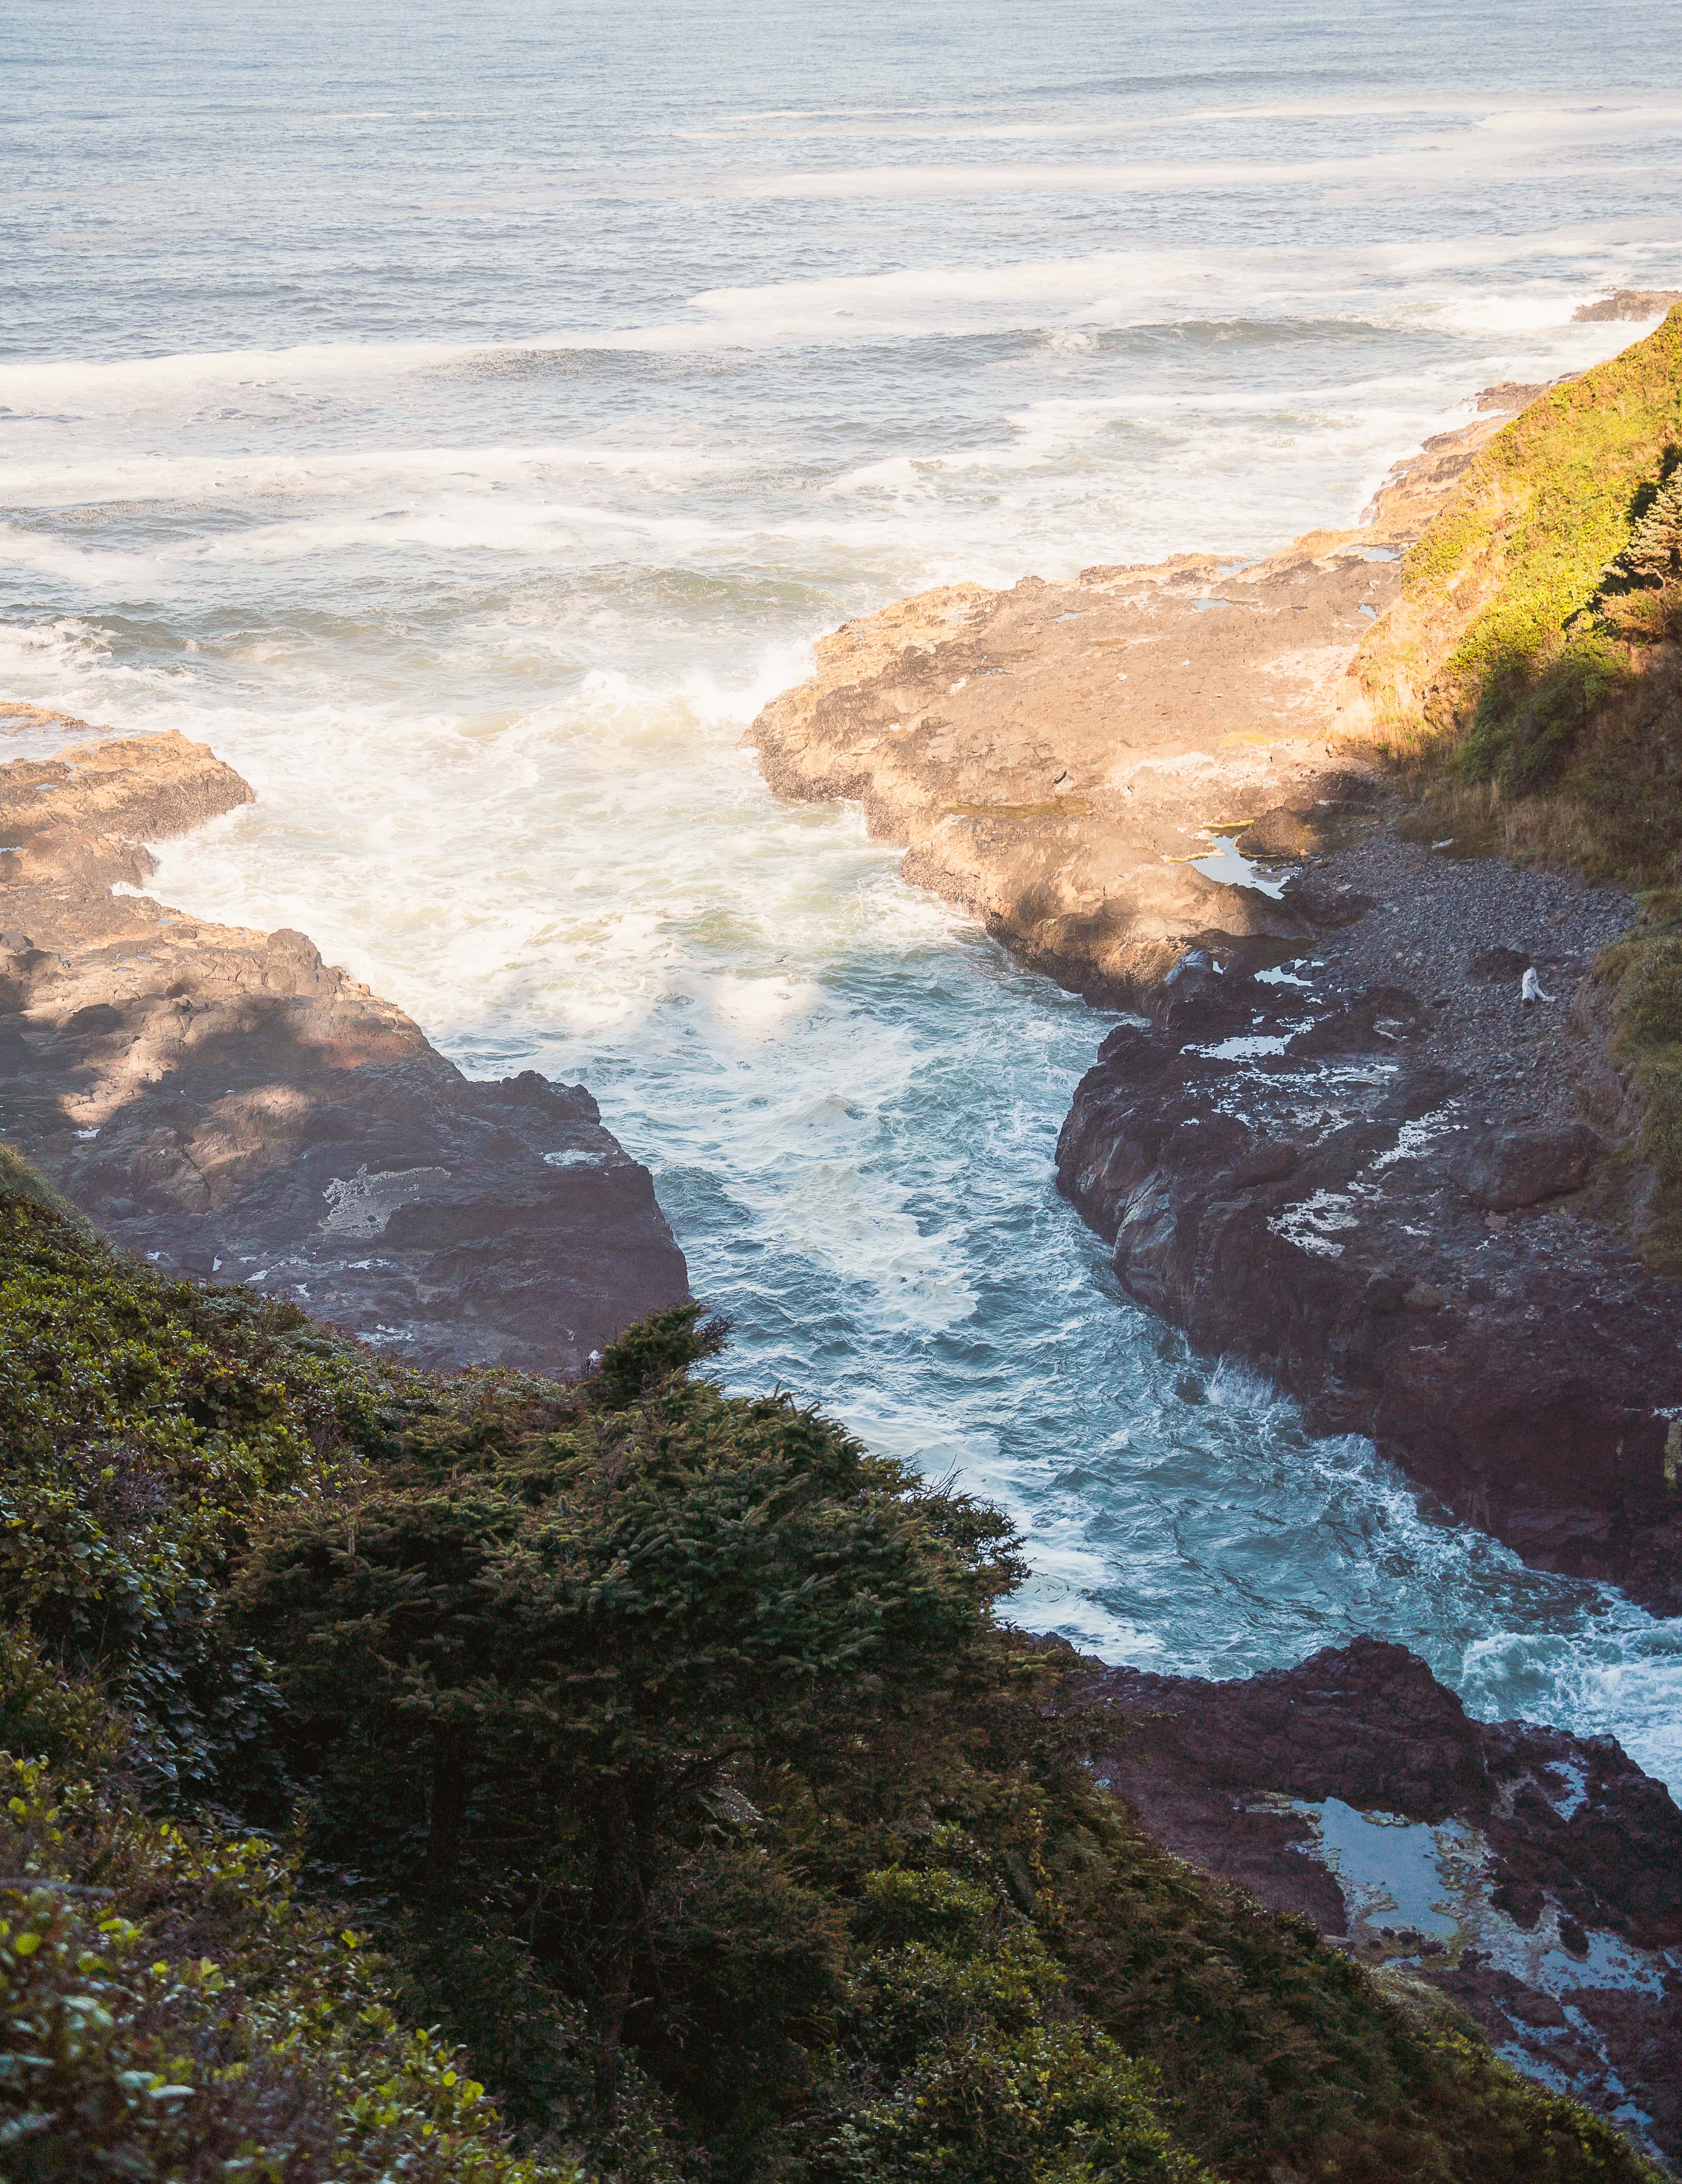 a view of devil's churn during the low tide. A popular destination on the Oregon coast road trip